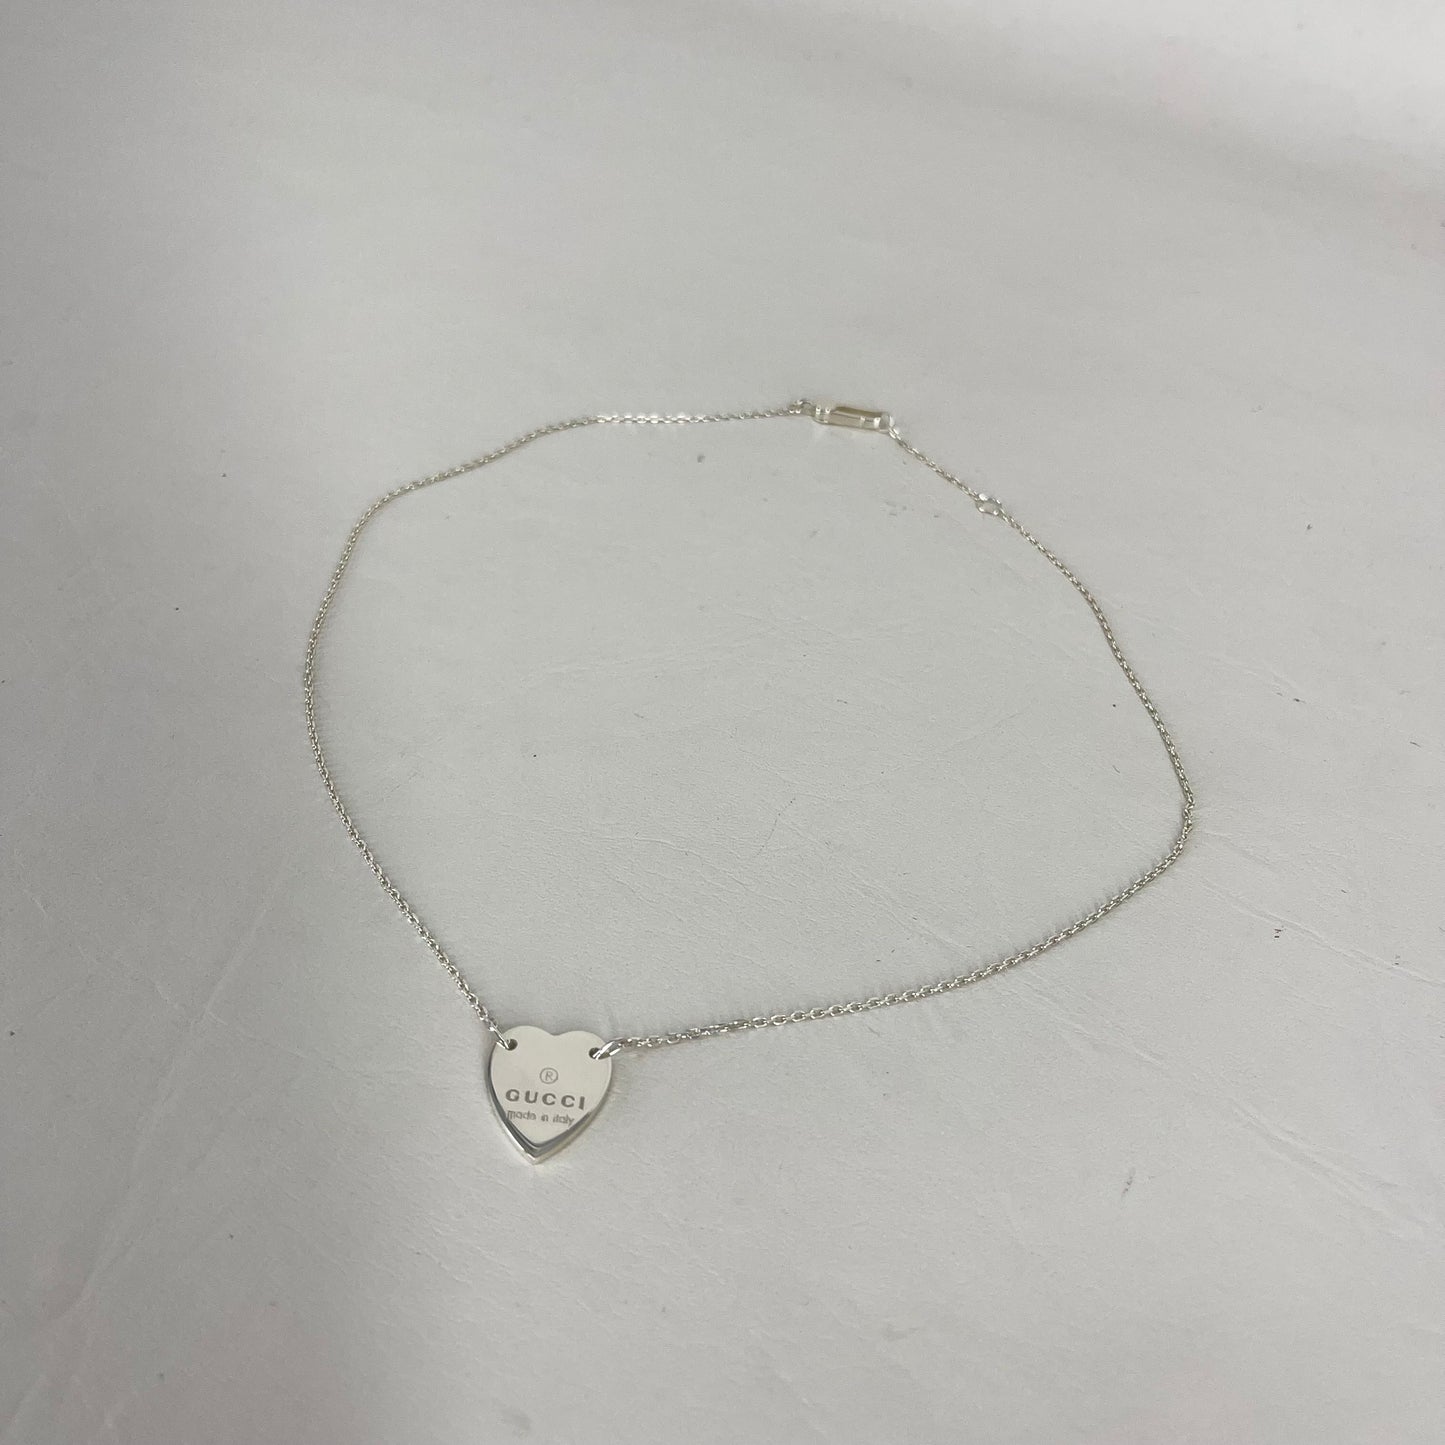 Authentic Gucci Silver Heart Necklace